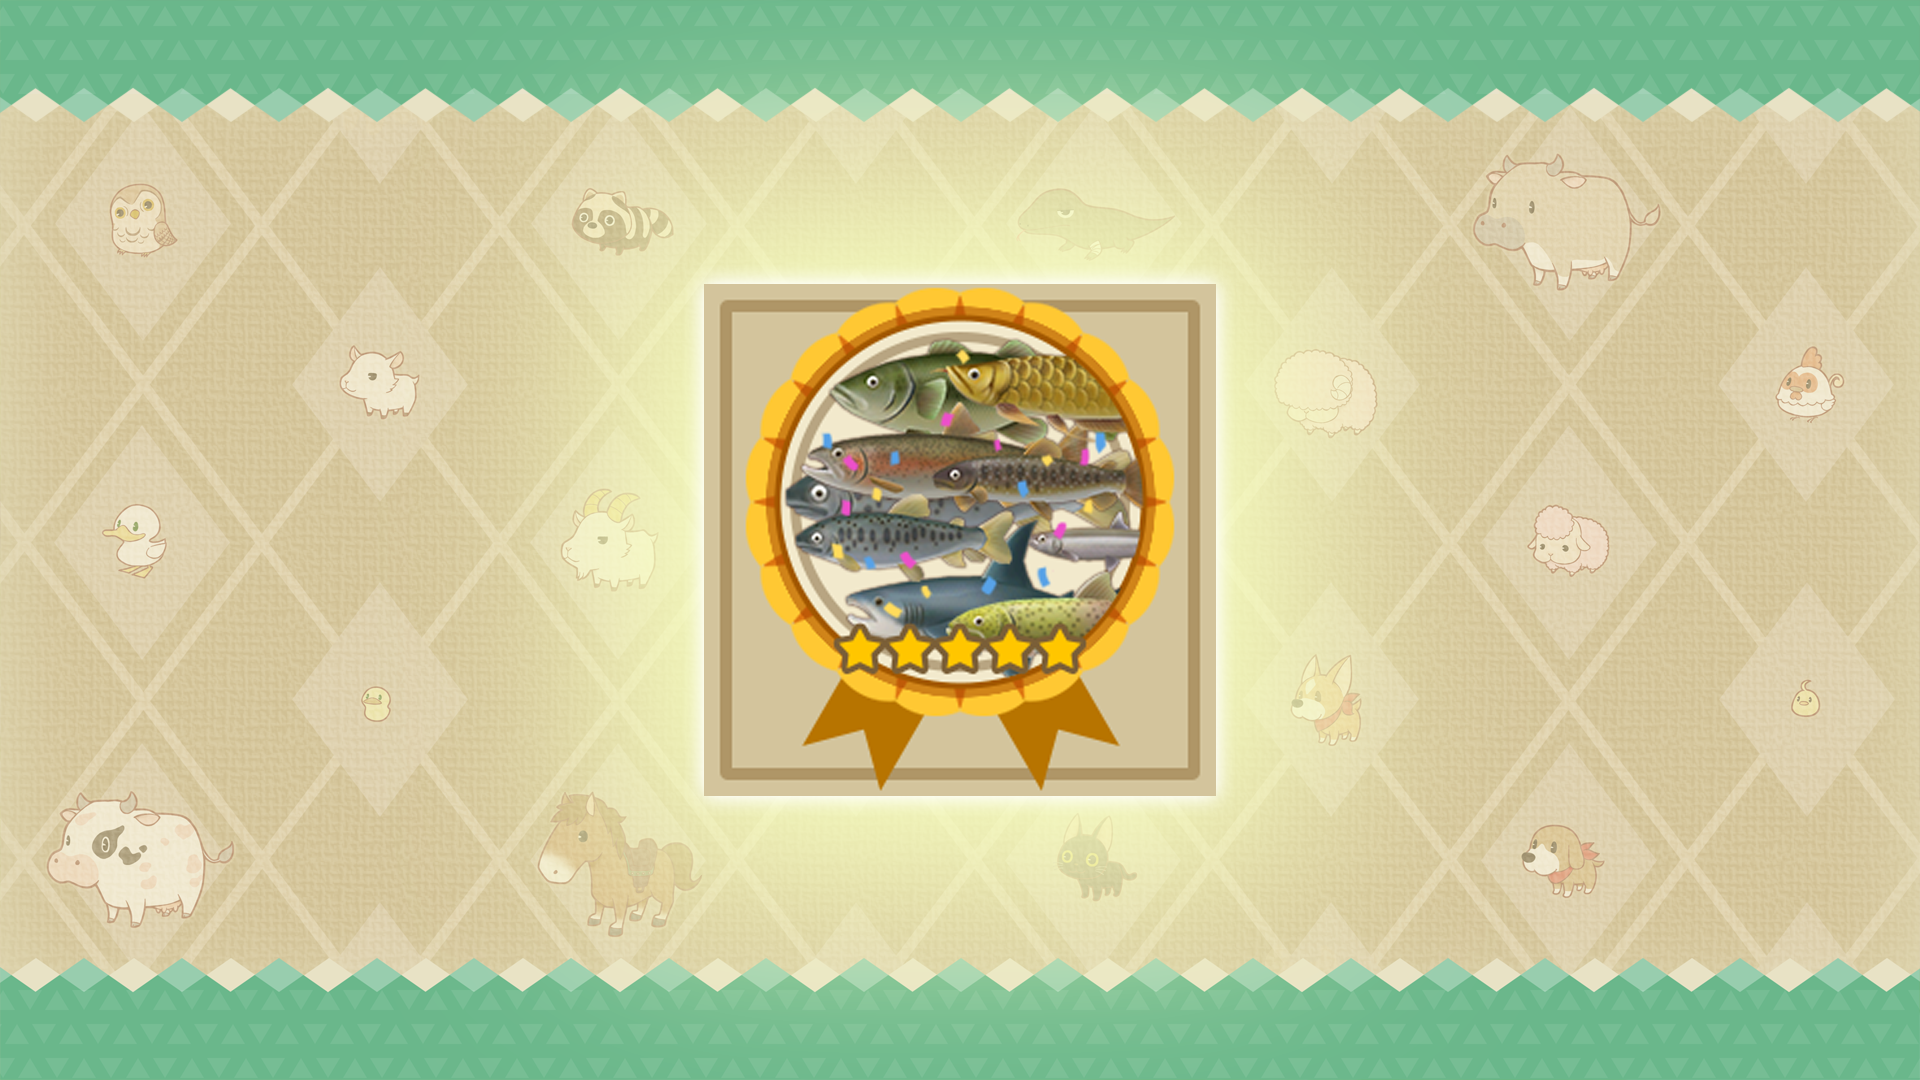 Icon for Obtained all fish.